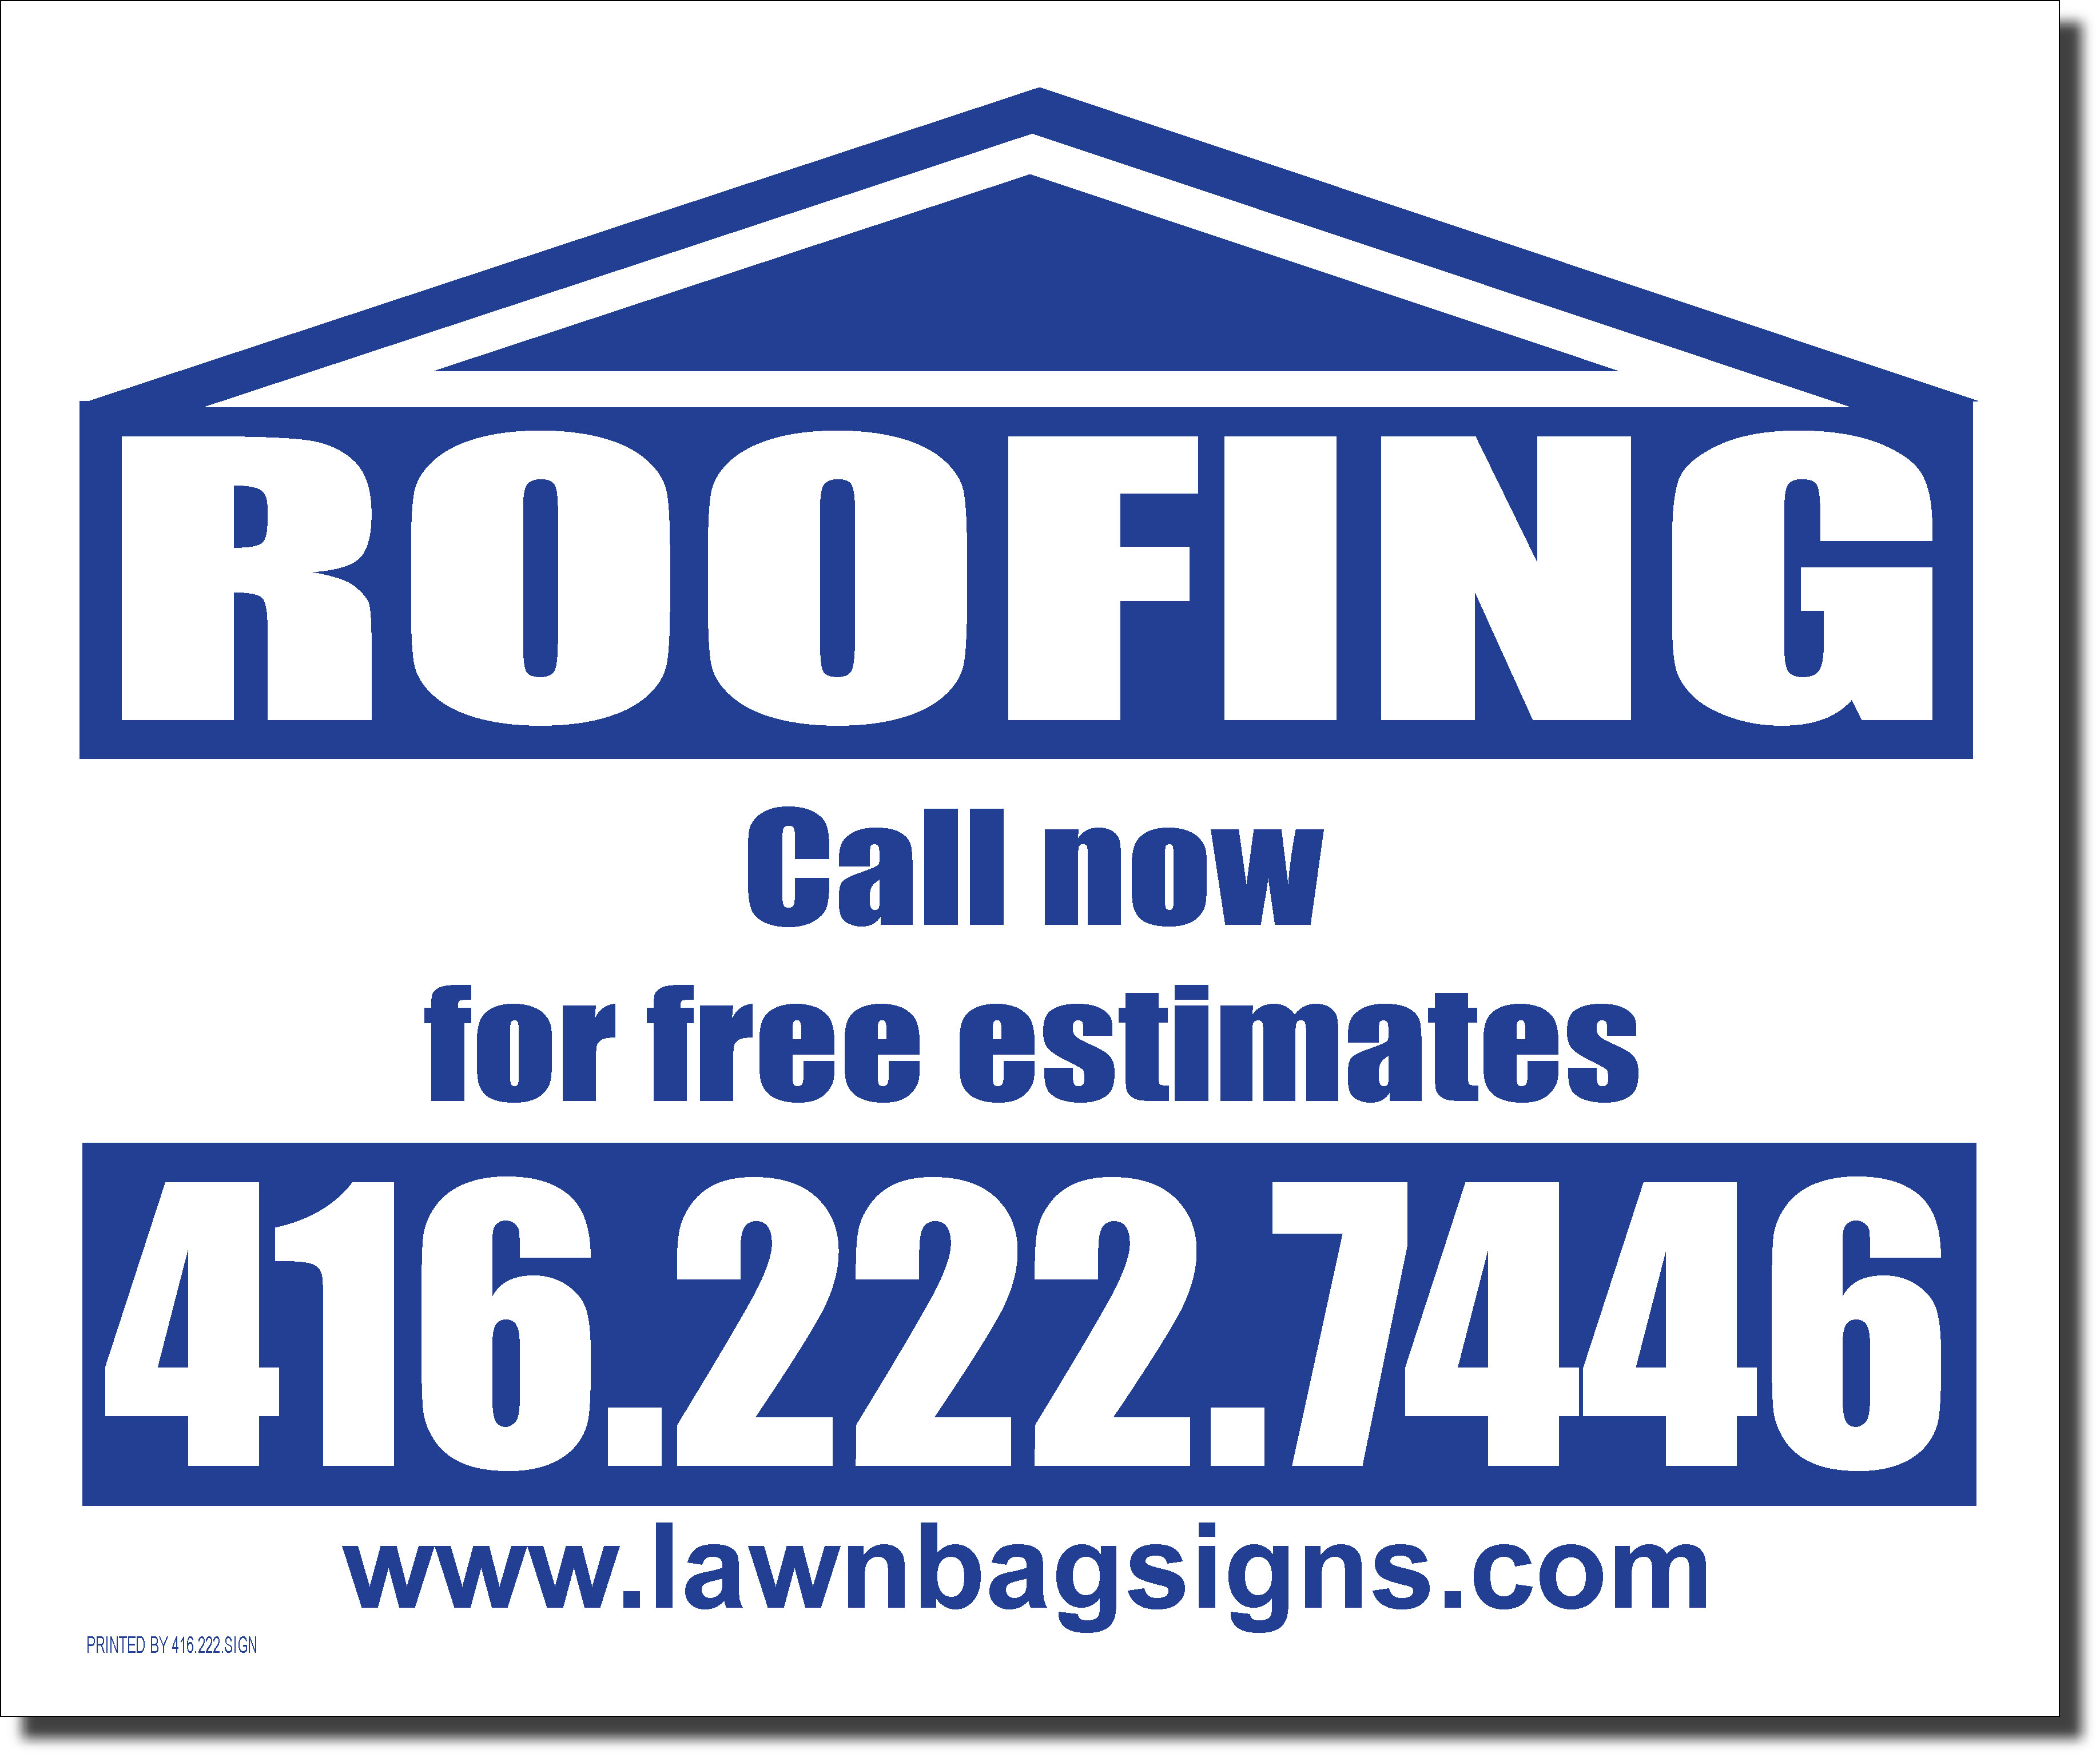 Roofing 24 x 20 Lawn Bag